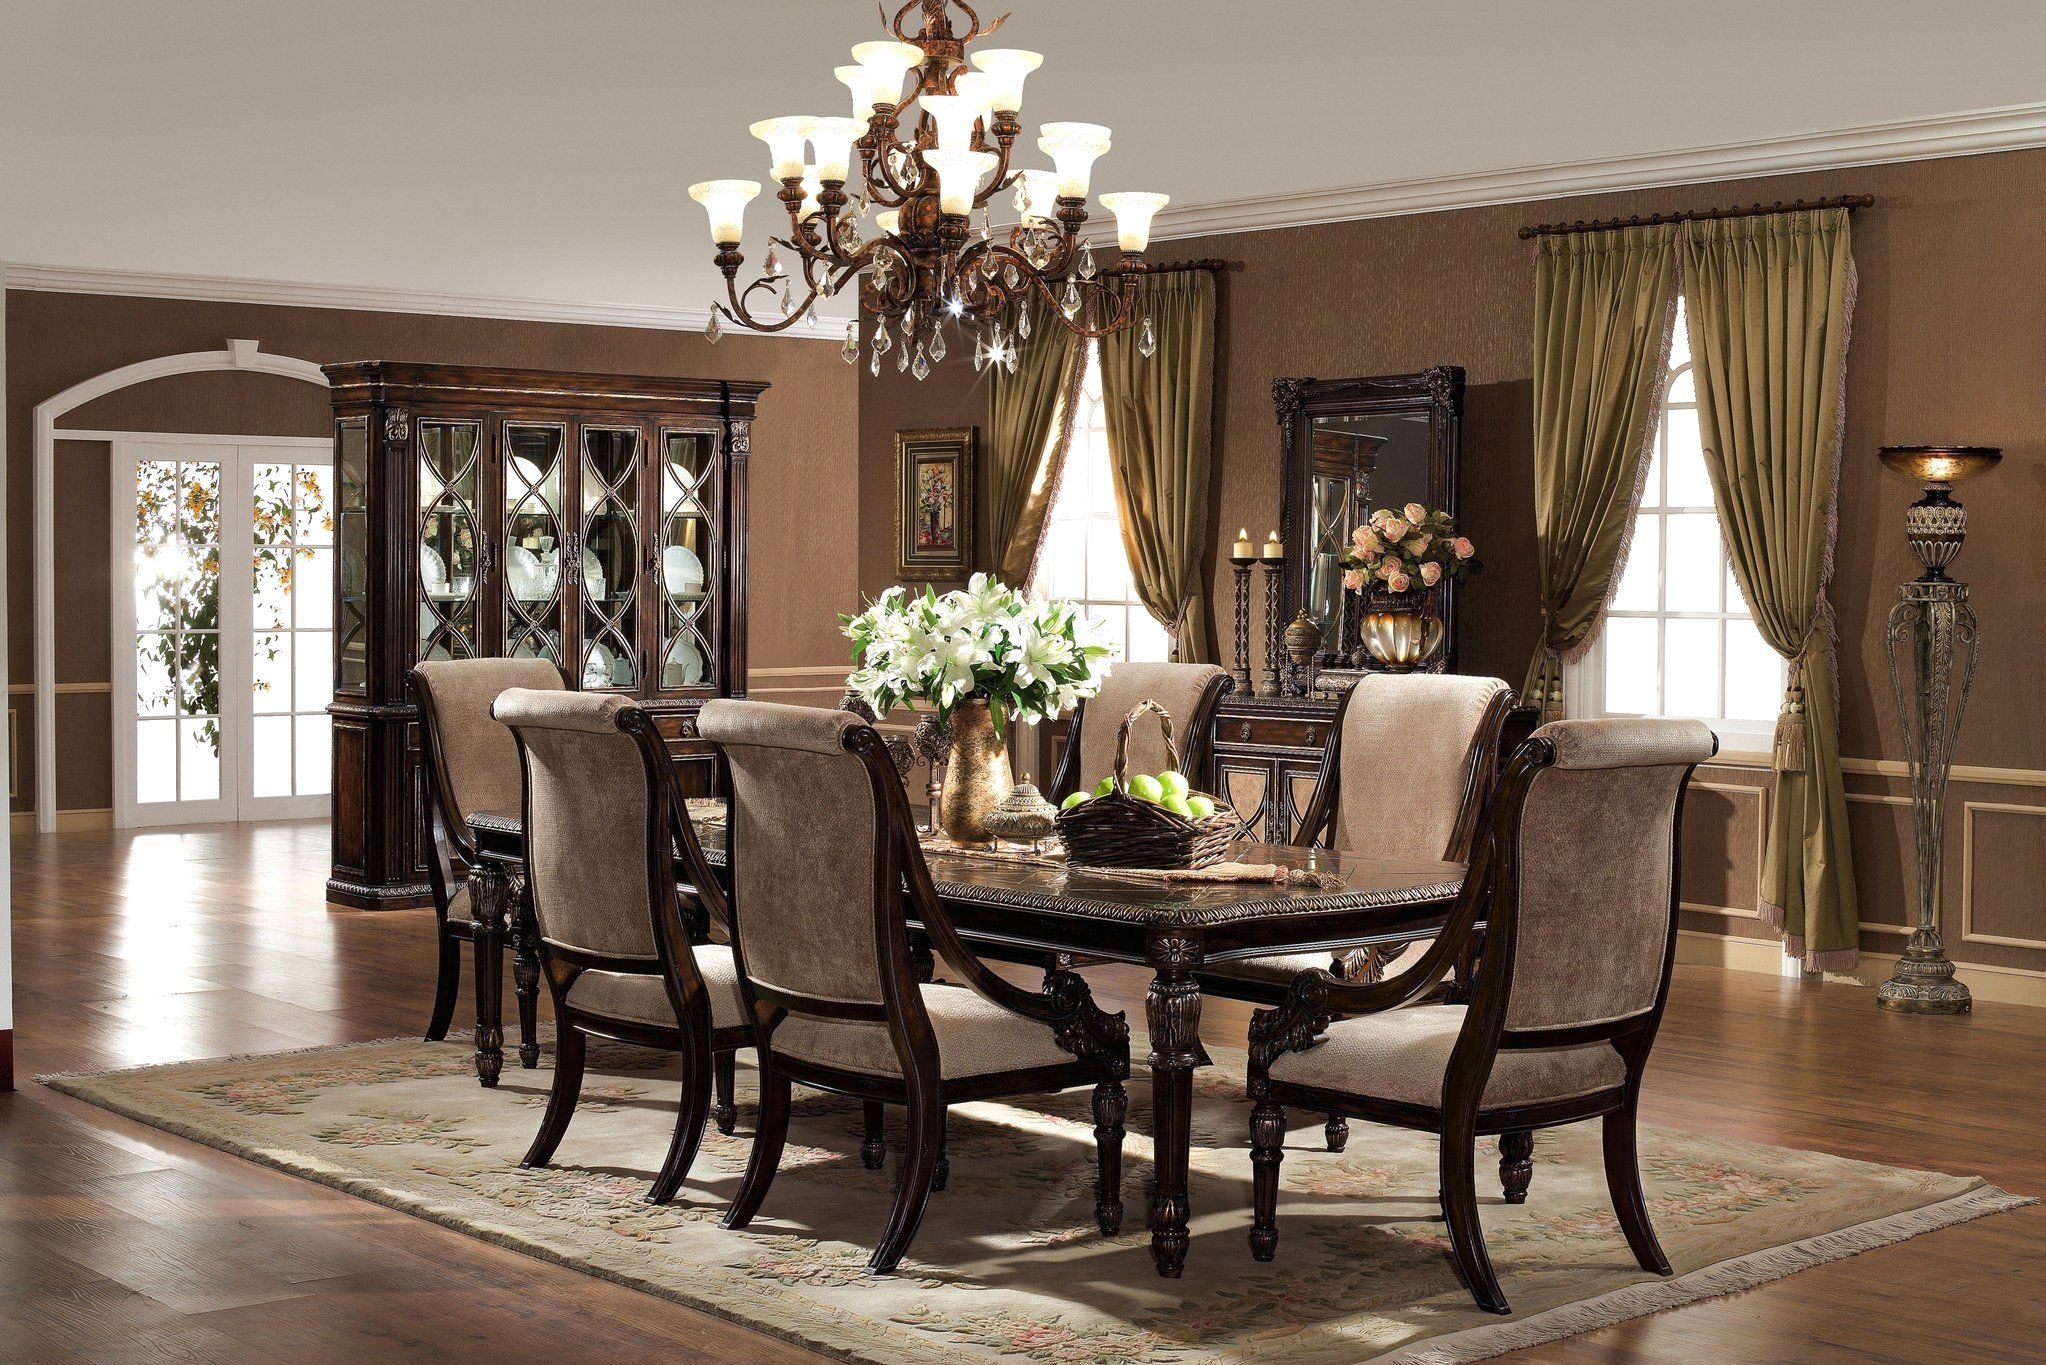 Fancy Dining Room Furniture, Fancy Dining Room Tables